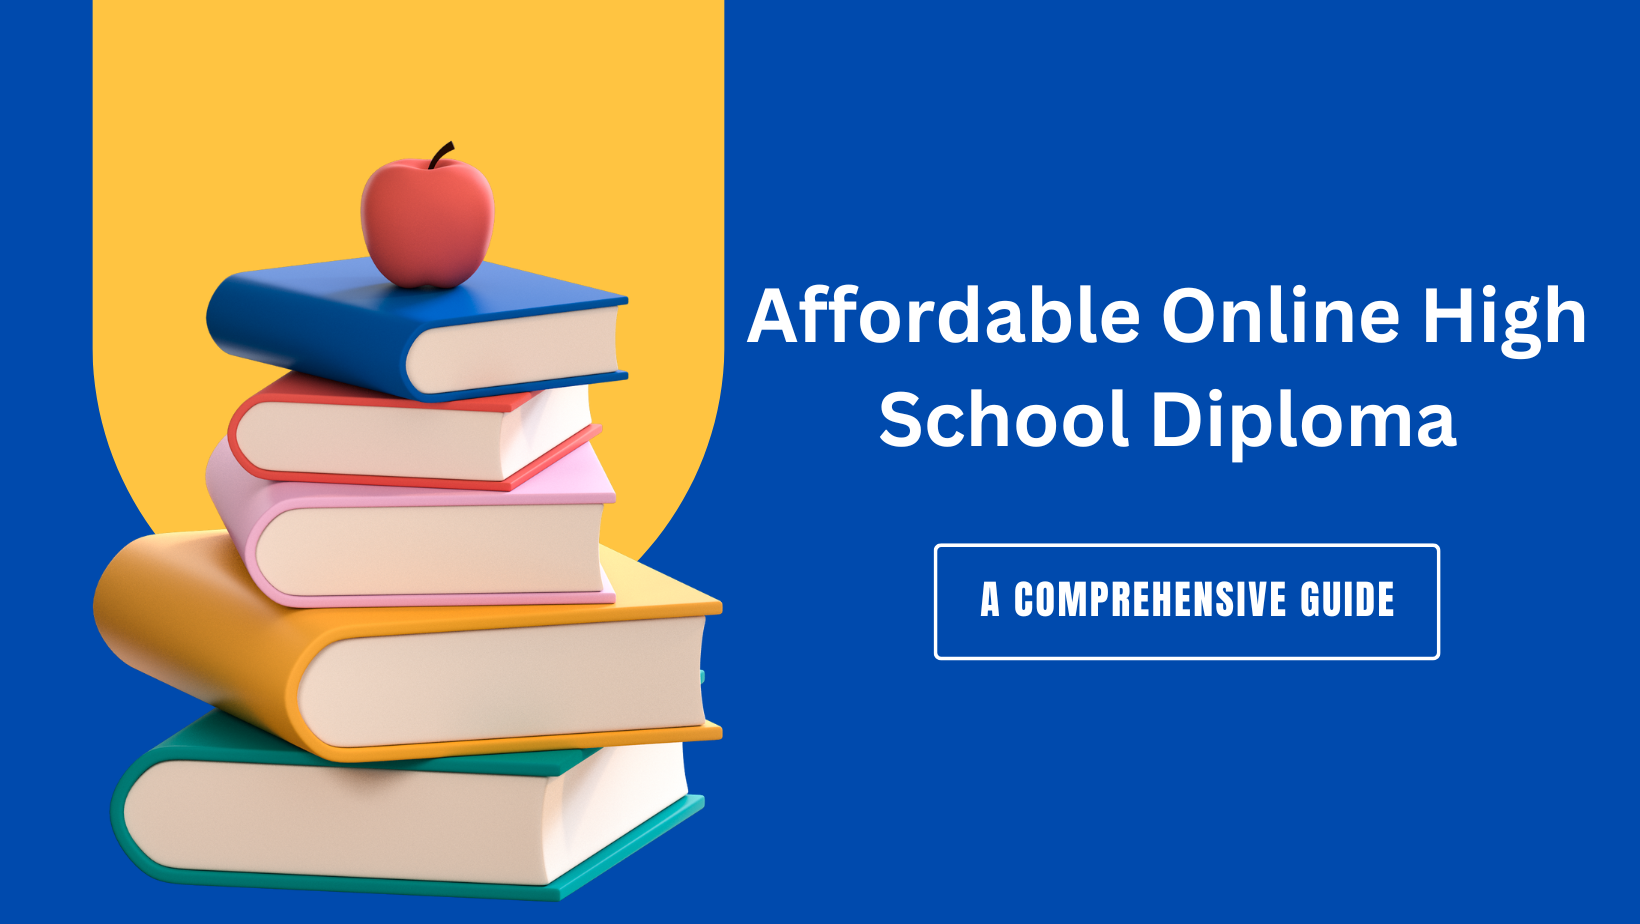 Affordable Online High School Diploma